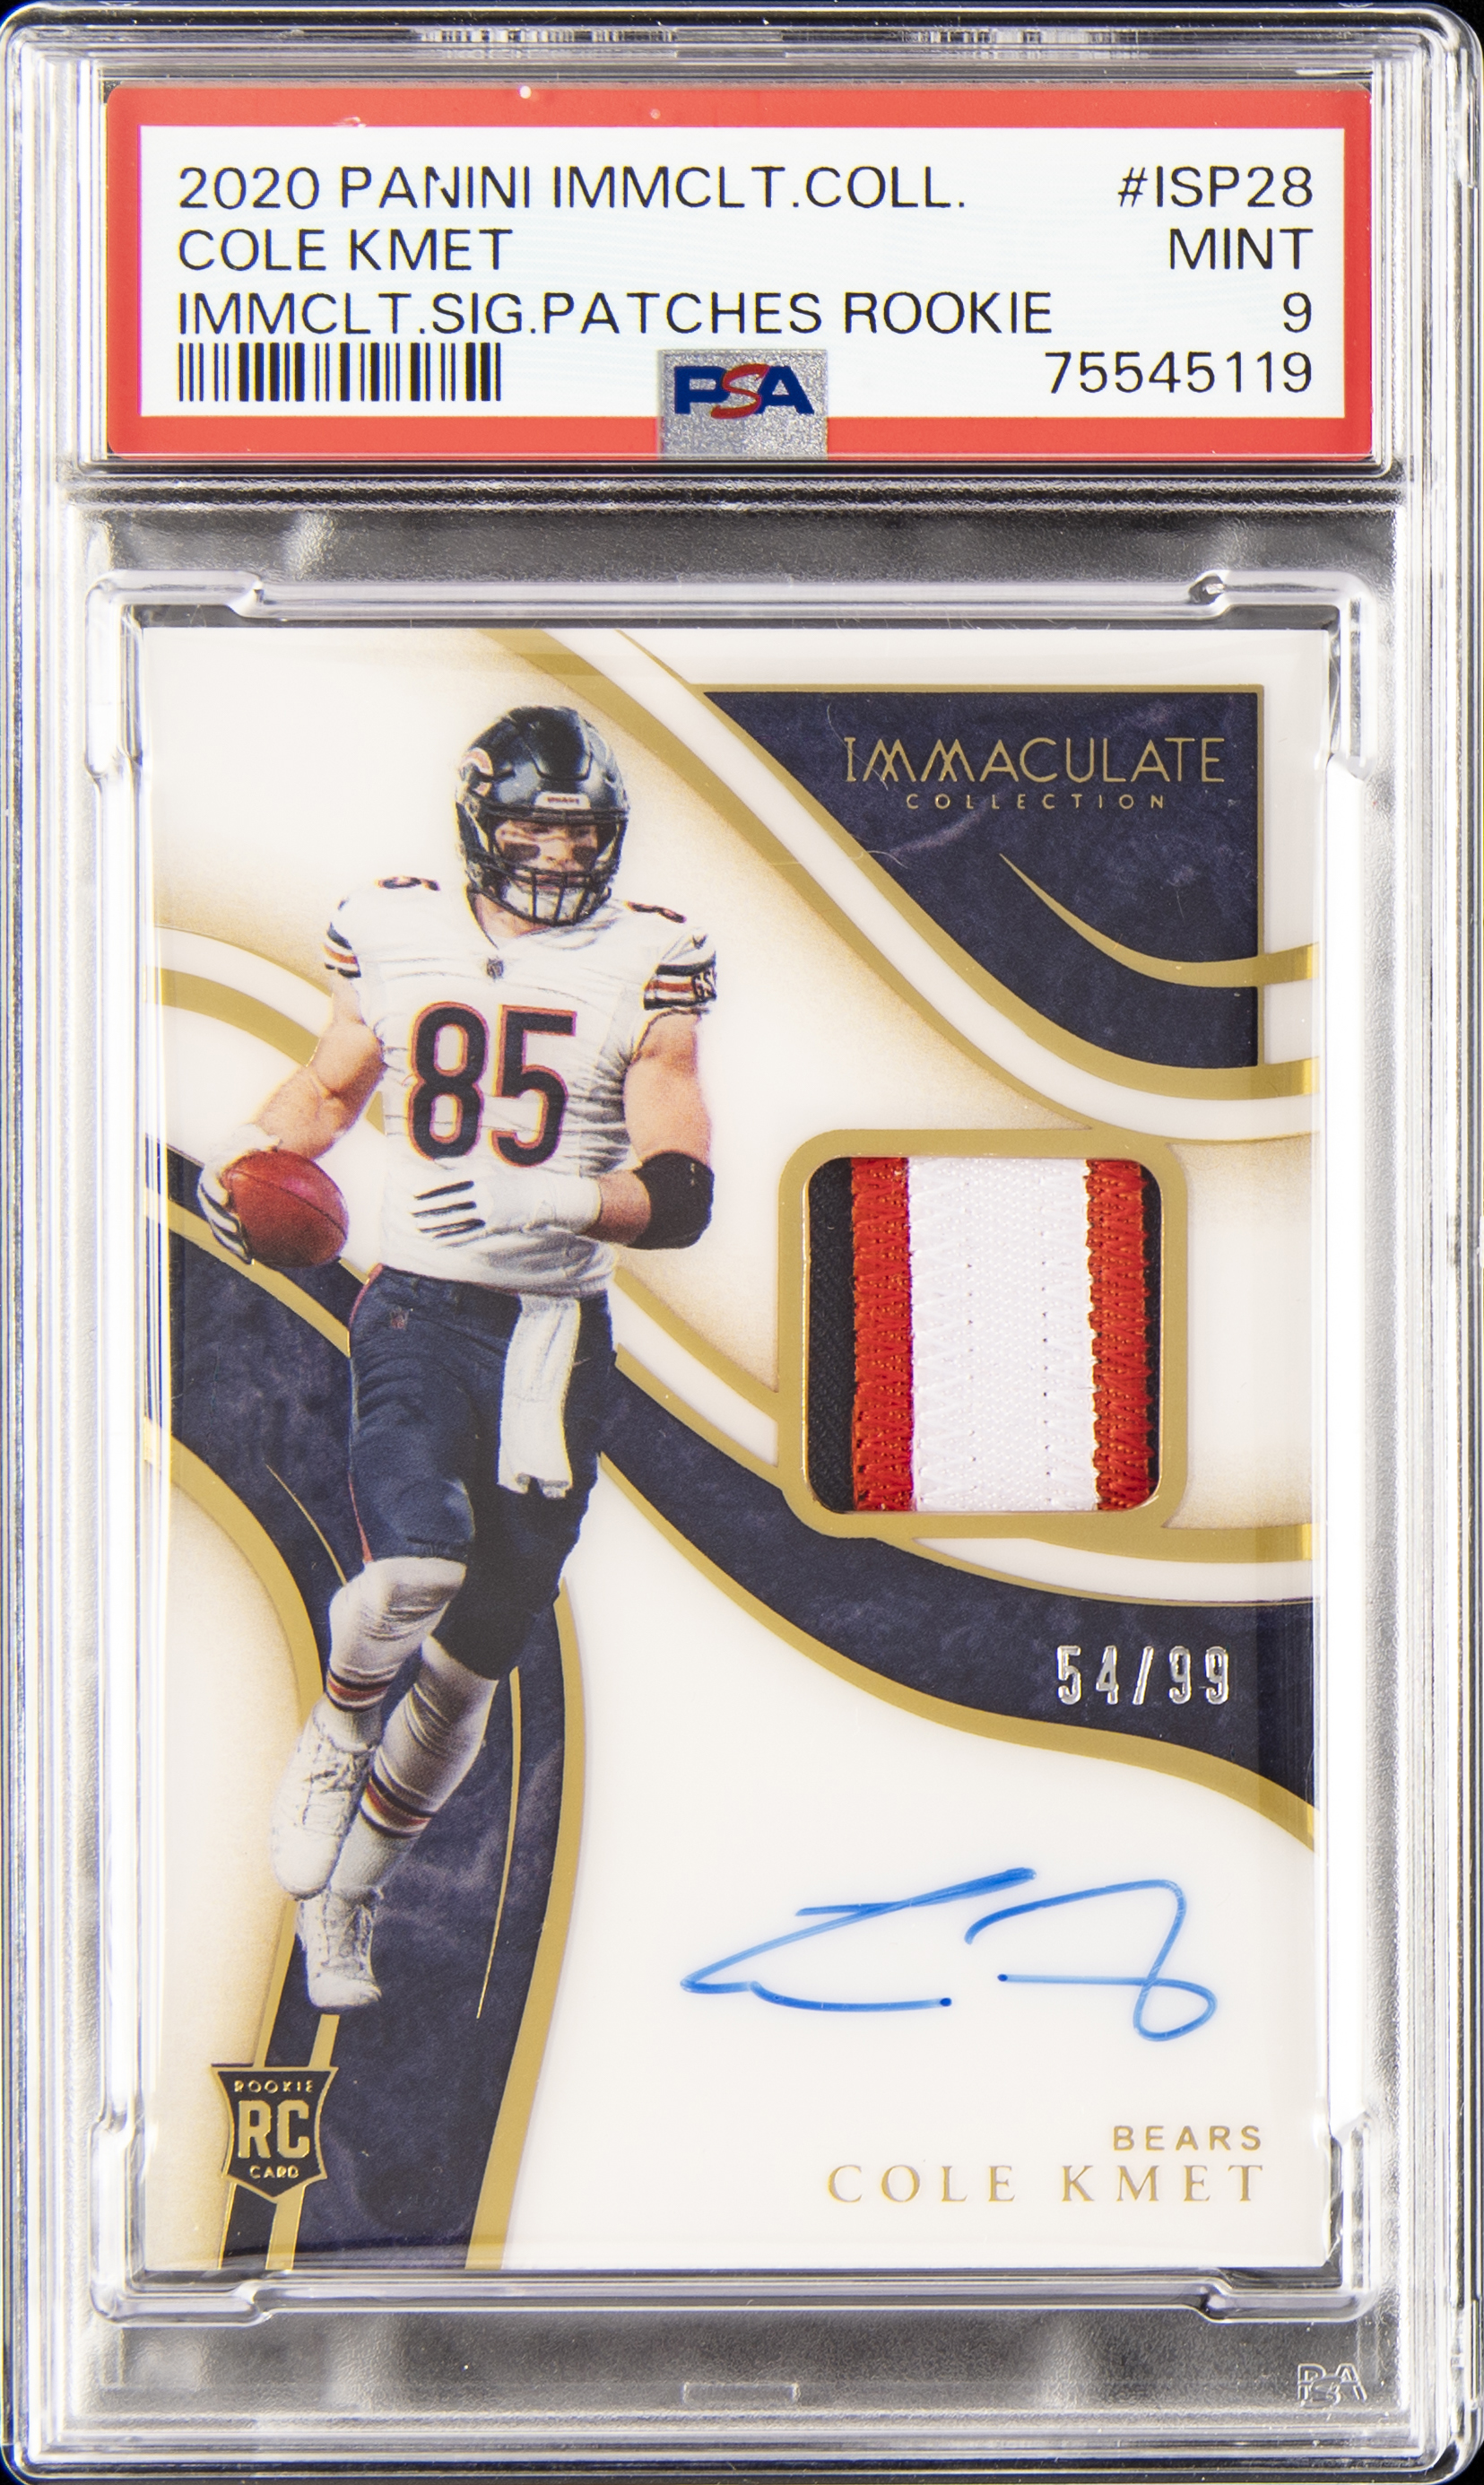 2020 Panini Immaculate Collection Immaculate Signature Patches Rookie #ISP28 Cole Kmet Signed Rookie Patch Card (#54/99) – PSA MINT 9